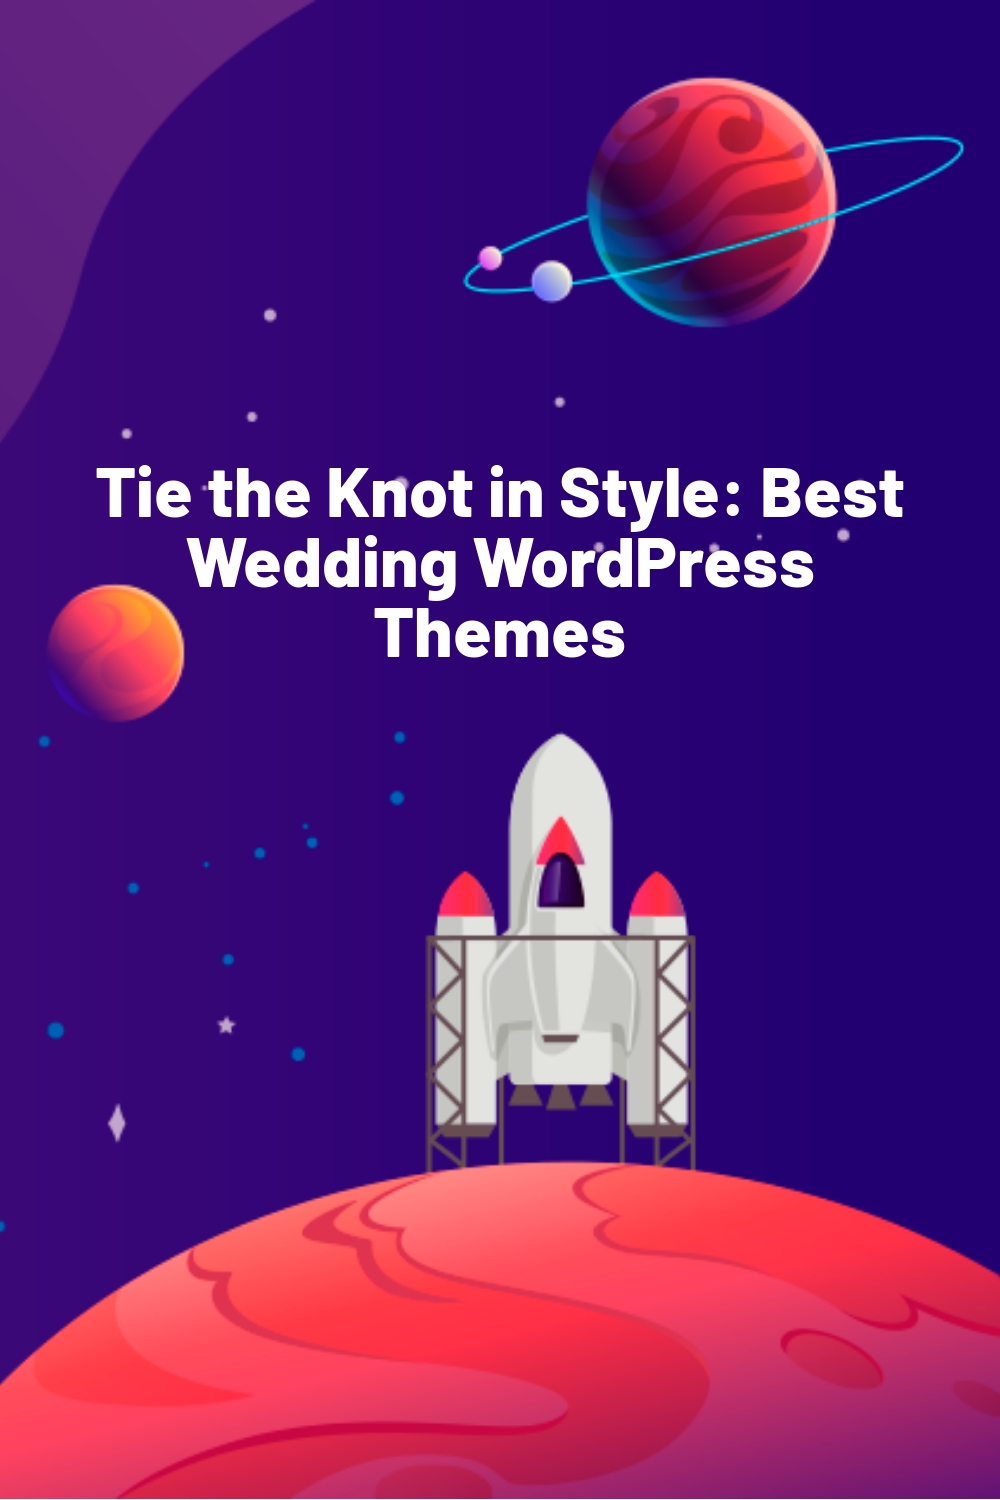 Tie the Knot in Style: Best Wedding WordPress Themes